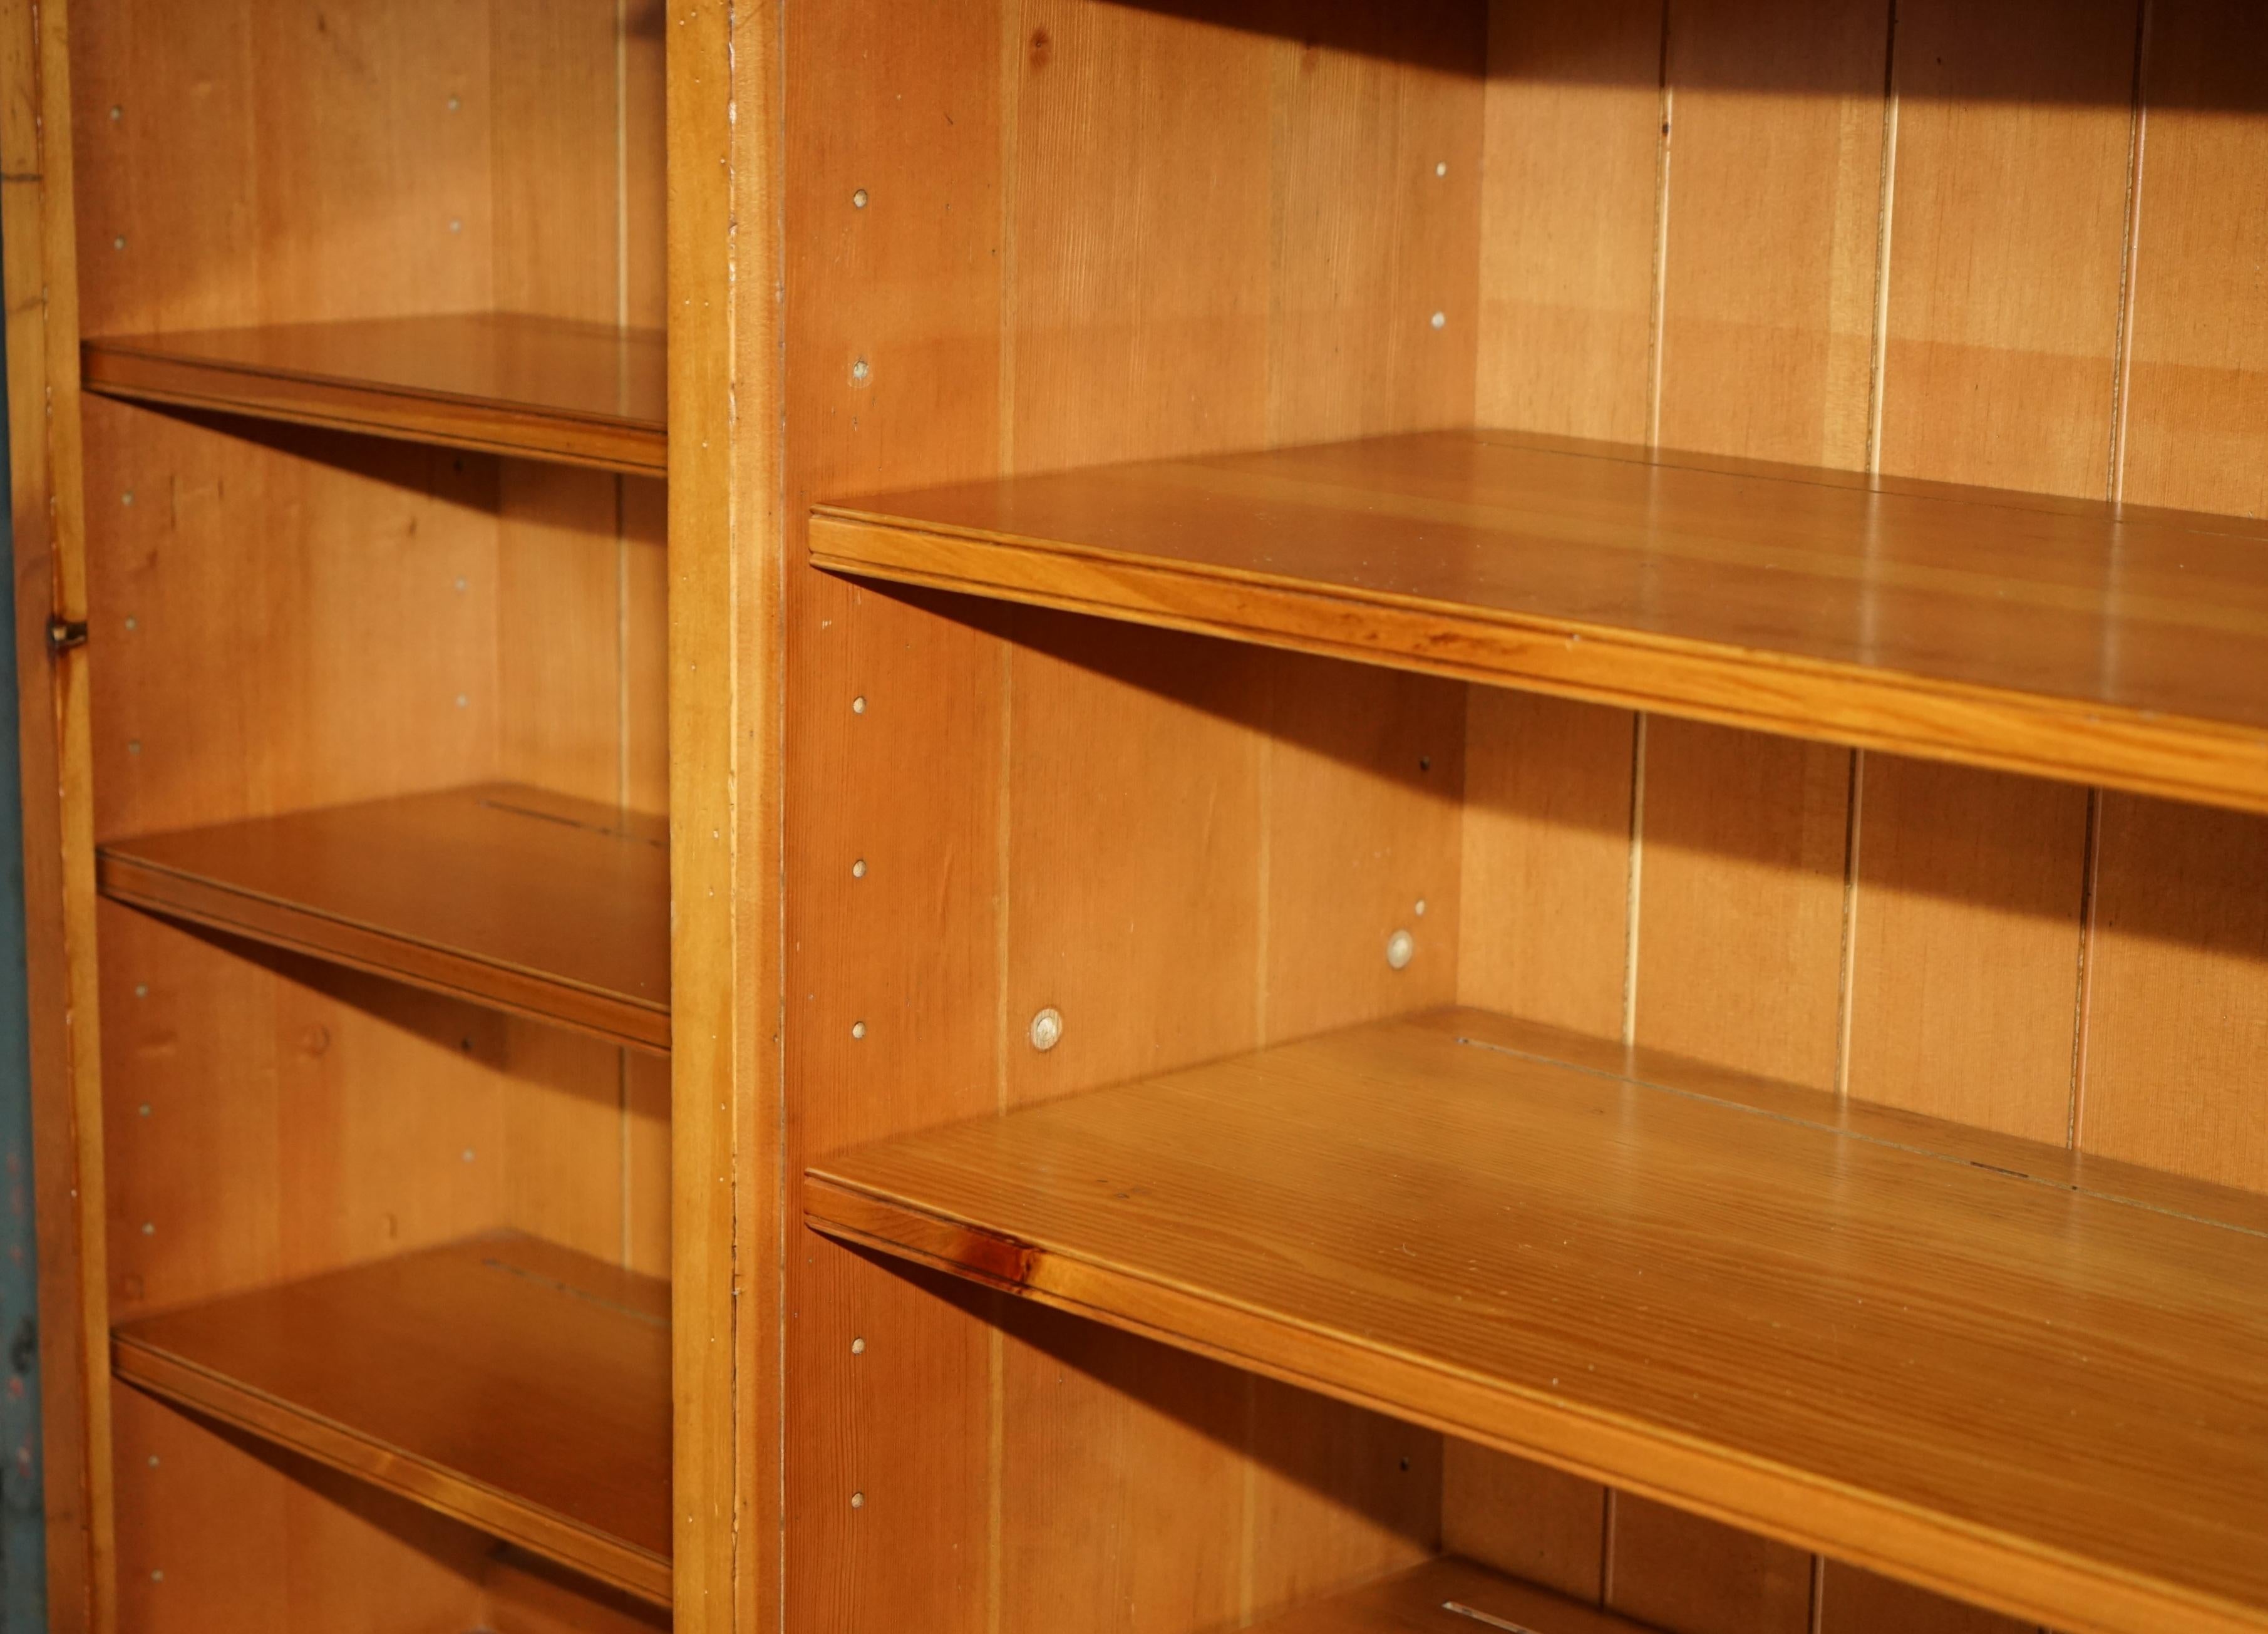 EXTRA LARGE RALPH LAUREN 1.7 METER TALL 2.4 METER WiDE OPEN OAK LIBRARY BOOKCASE For Sale 1